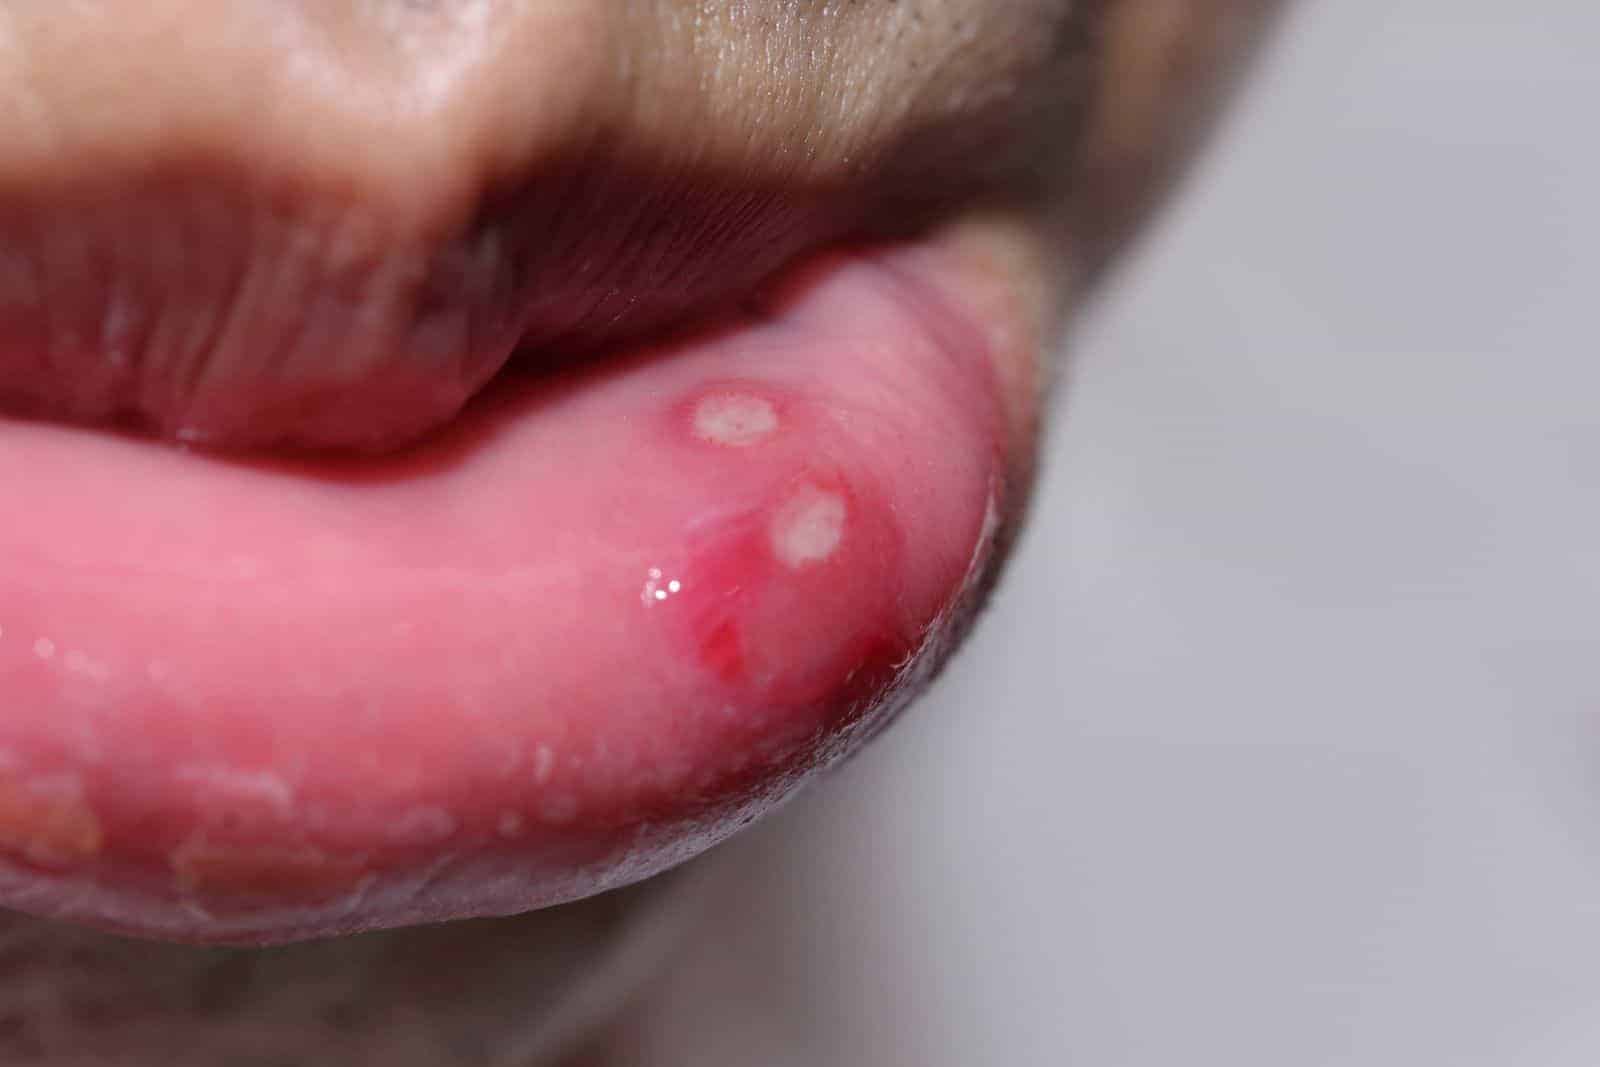 Dentists Explain the Cause of Canker Sores (and How to Fix It)